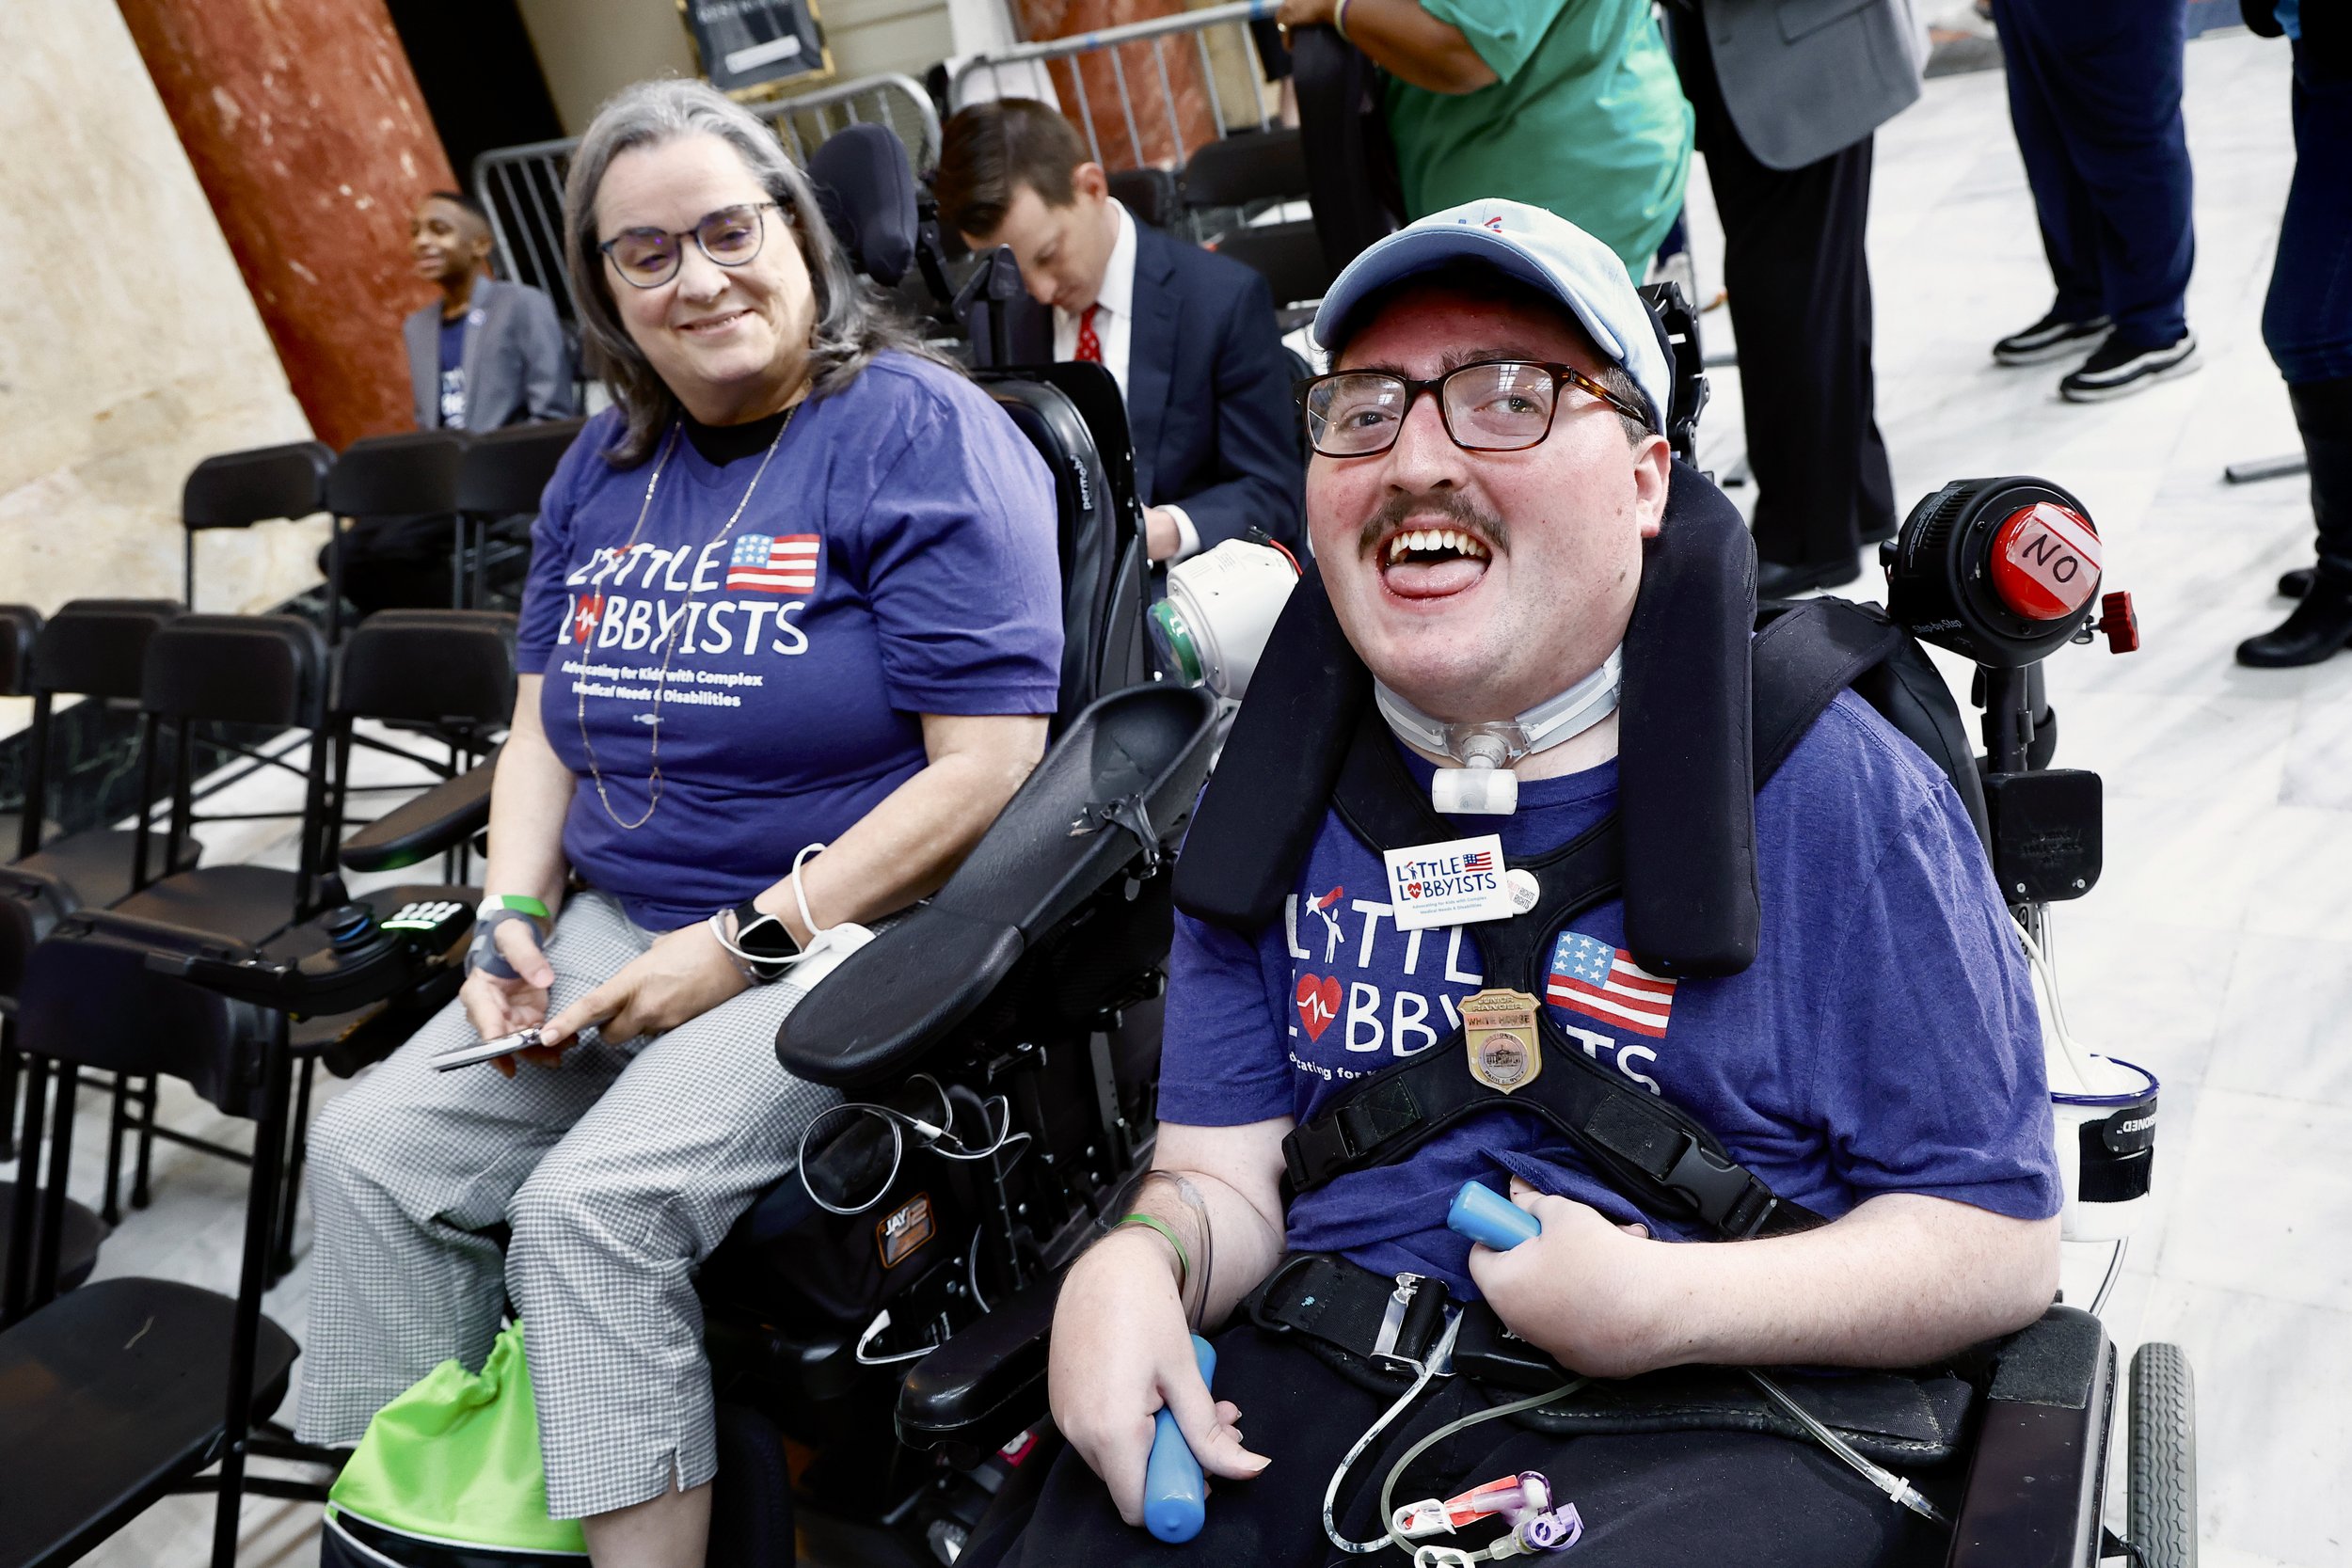  Stephanie and Rob pose in their wheelchairs inside the ADA section at the rally. 